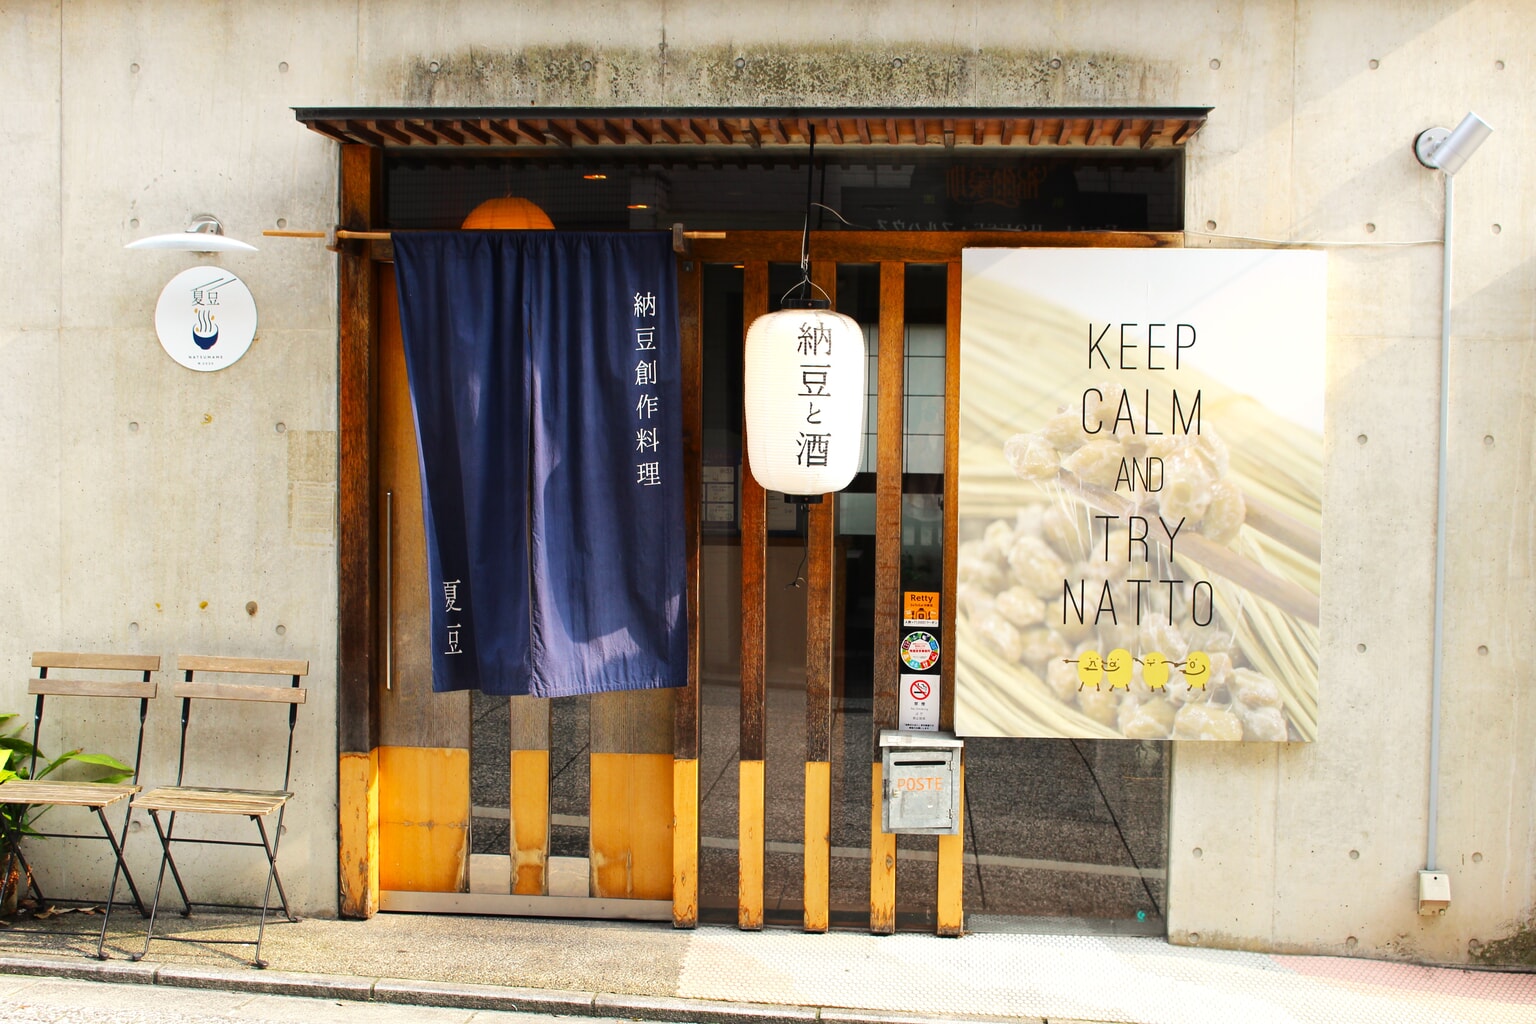 try natto in Kyoto